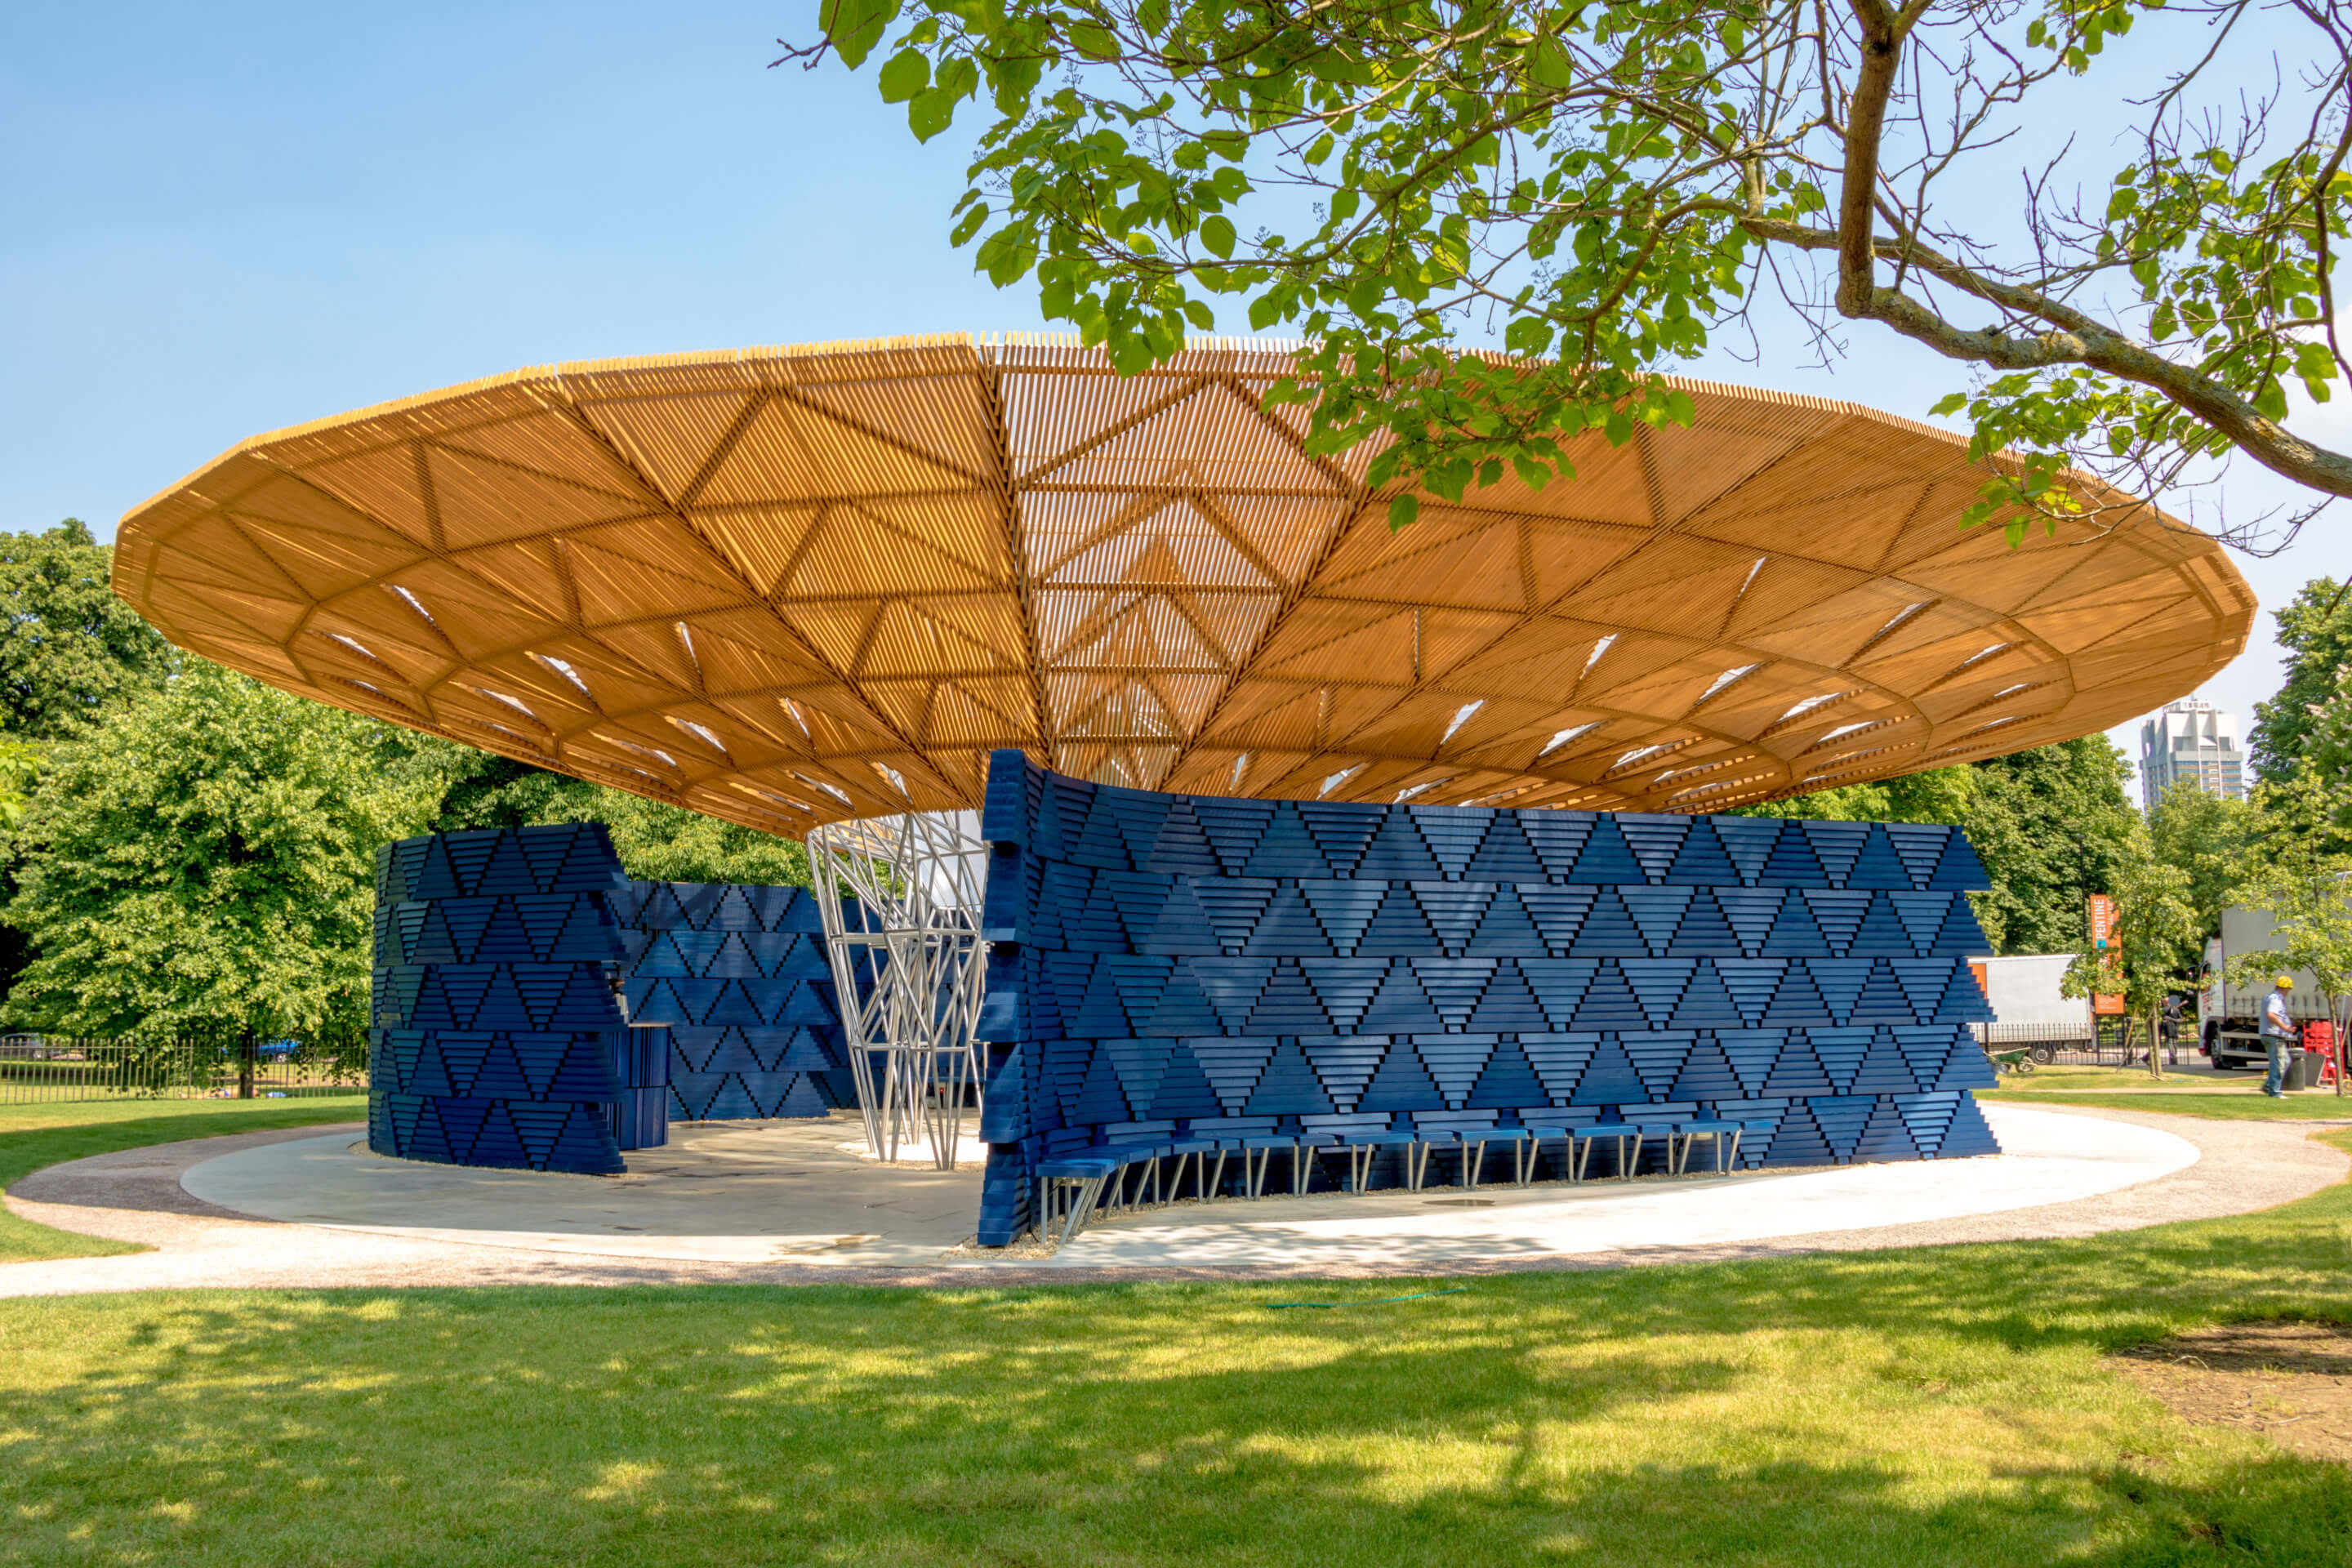 view of a temporary pavilion with blue walls and a large circular roof